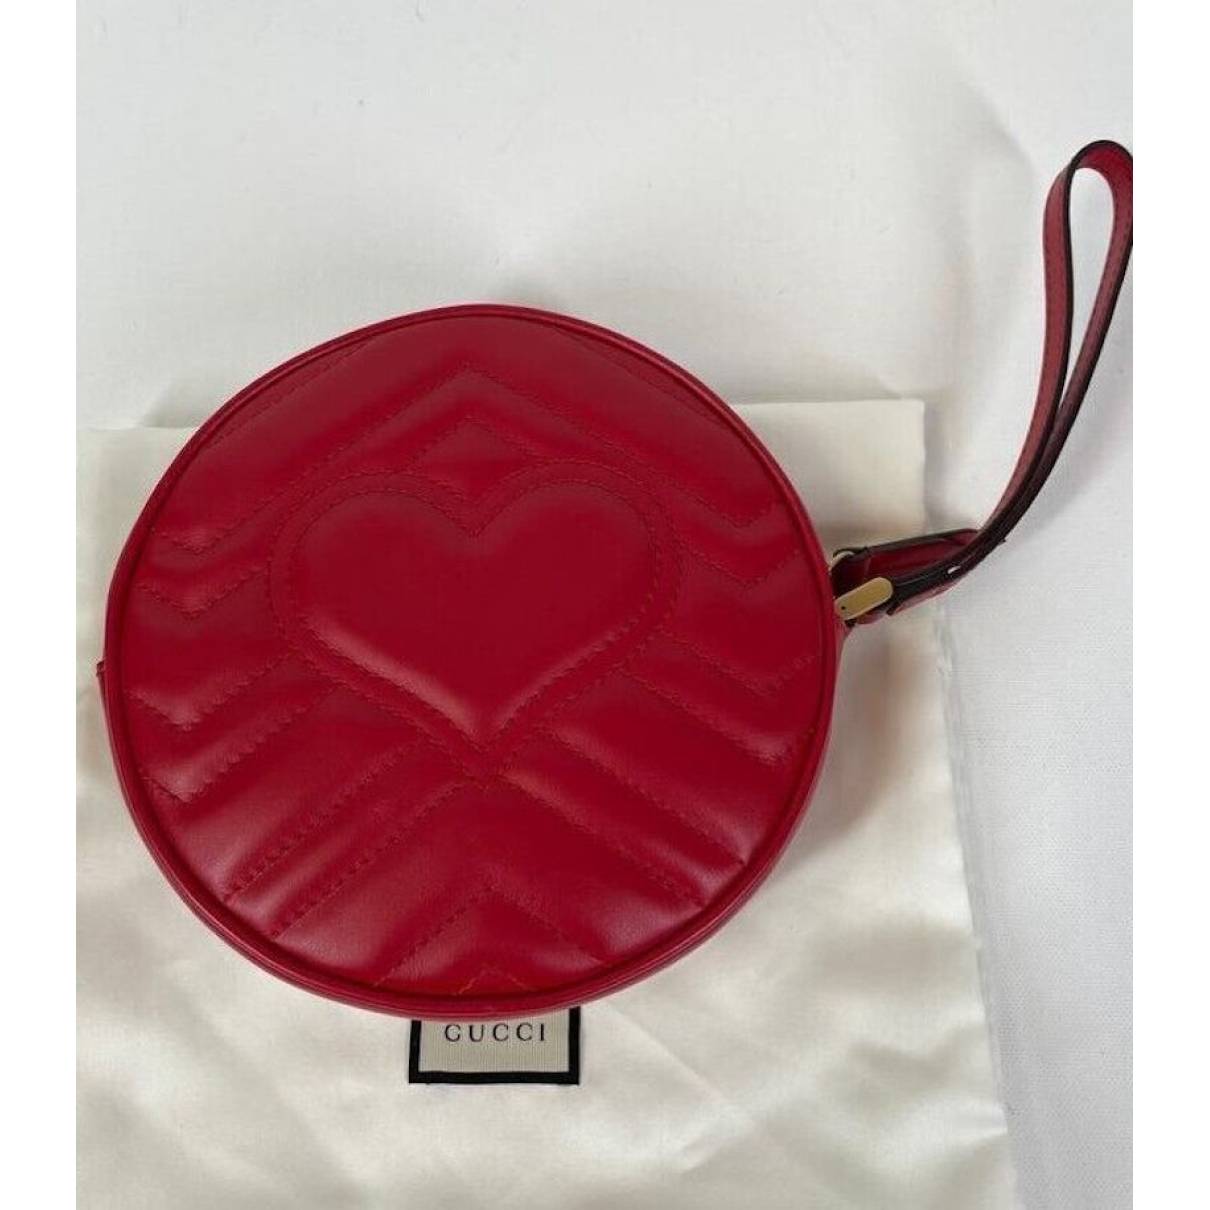 Buy Gucci Leather clutch bag online